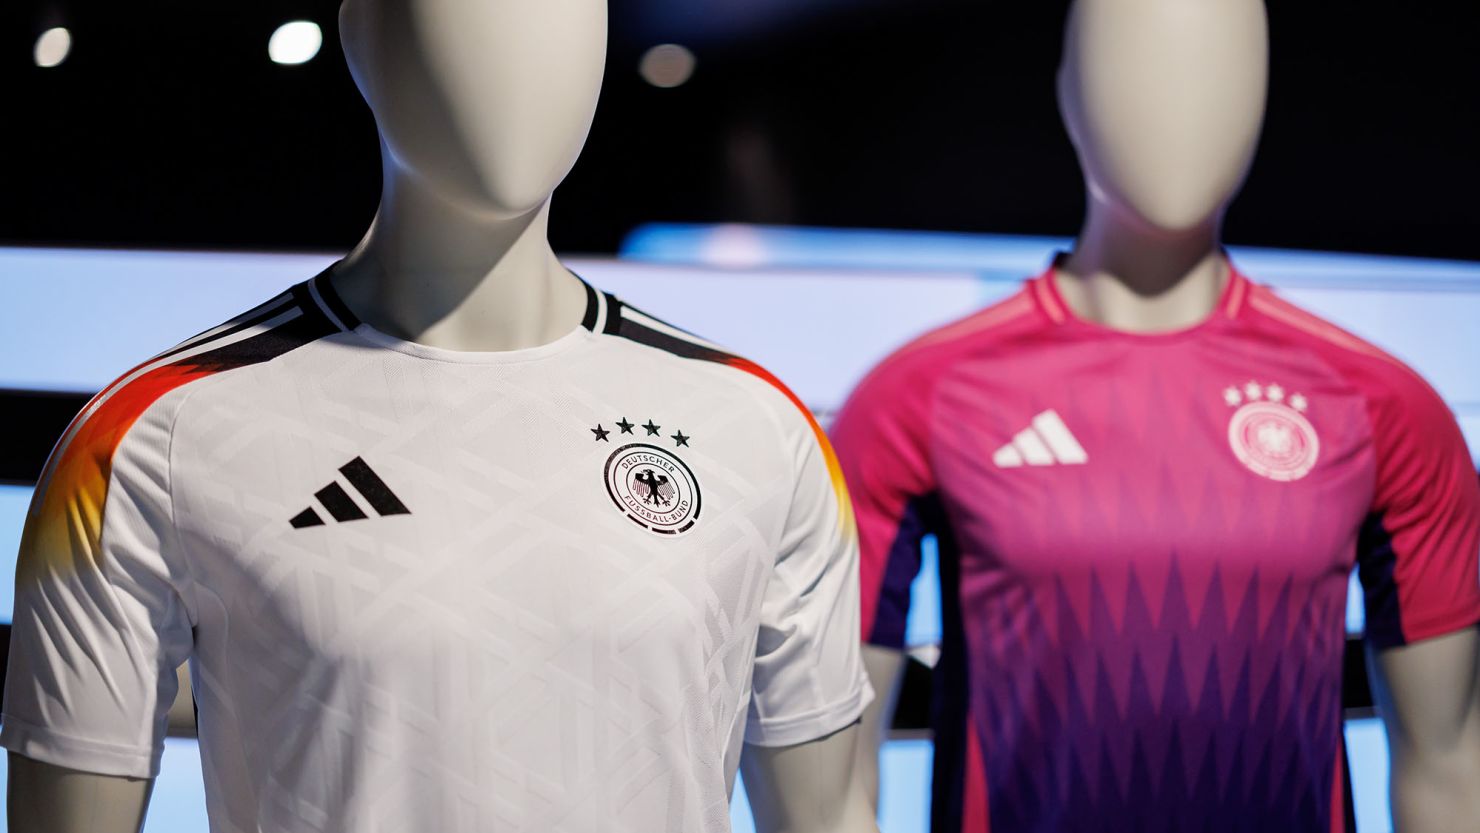 The official jerseys of the German men's national soccer team for this year's European Football Championship on display at the Adidas headquarters in Bavaria, Germany, in March 2024.